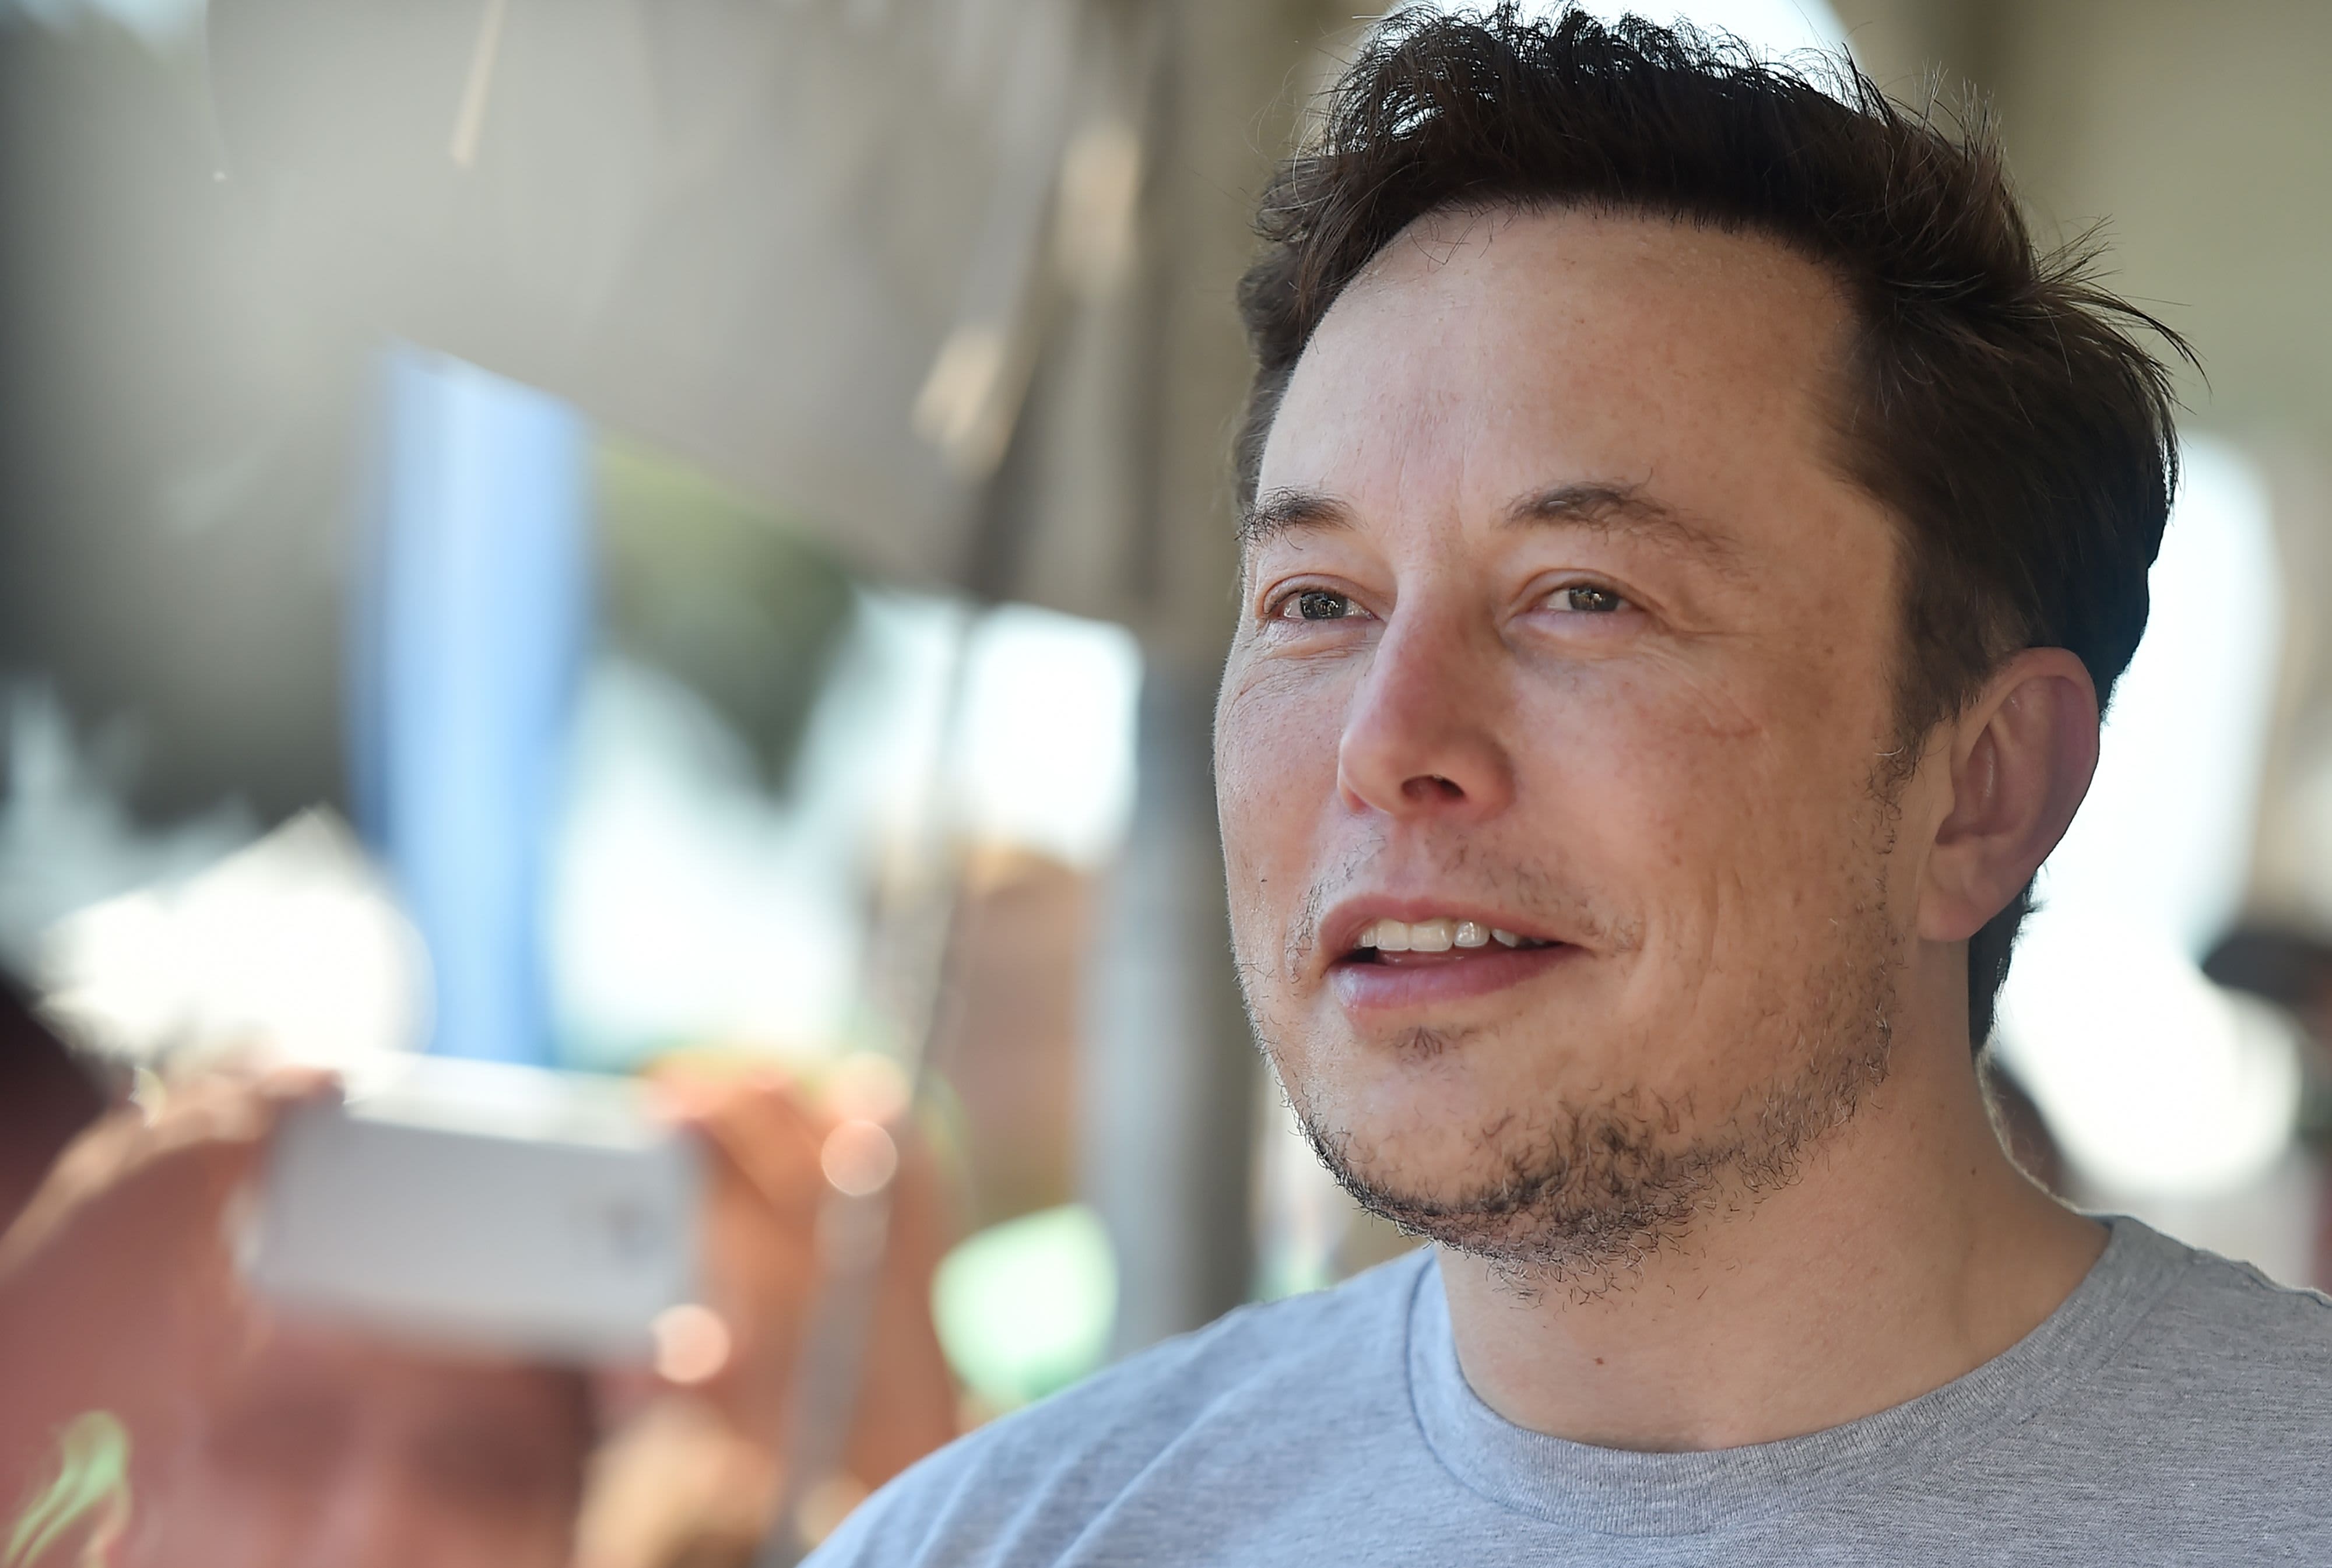 Teslas Elon Musk Surprising facts about his youth